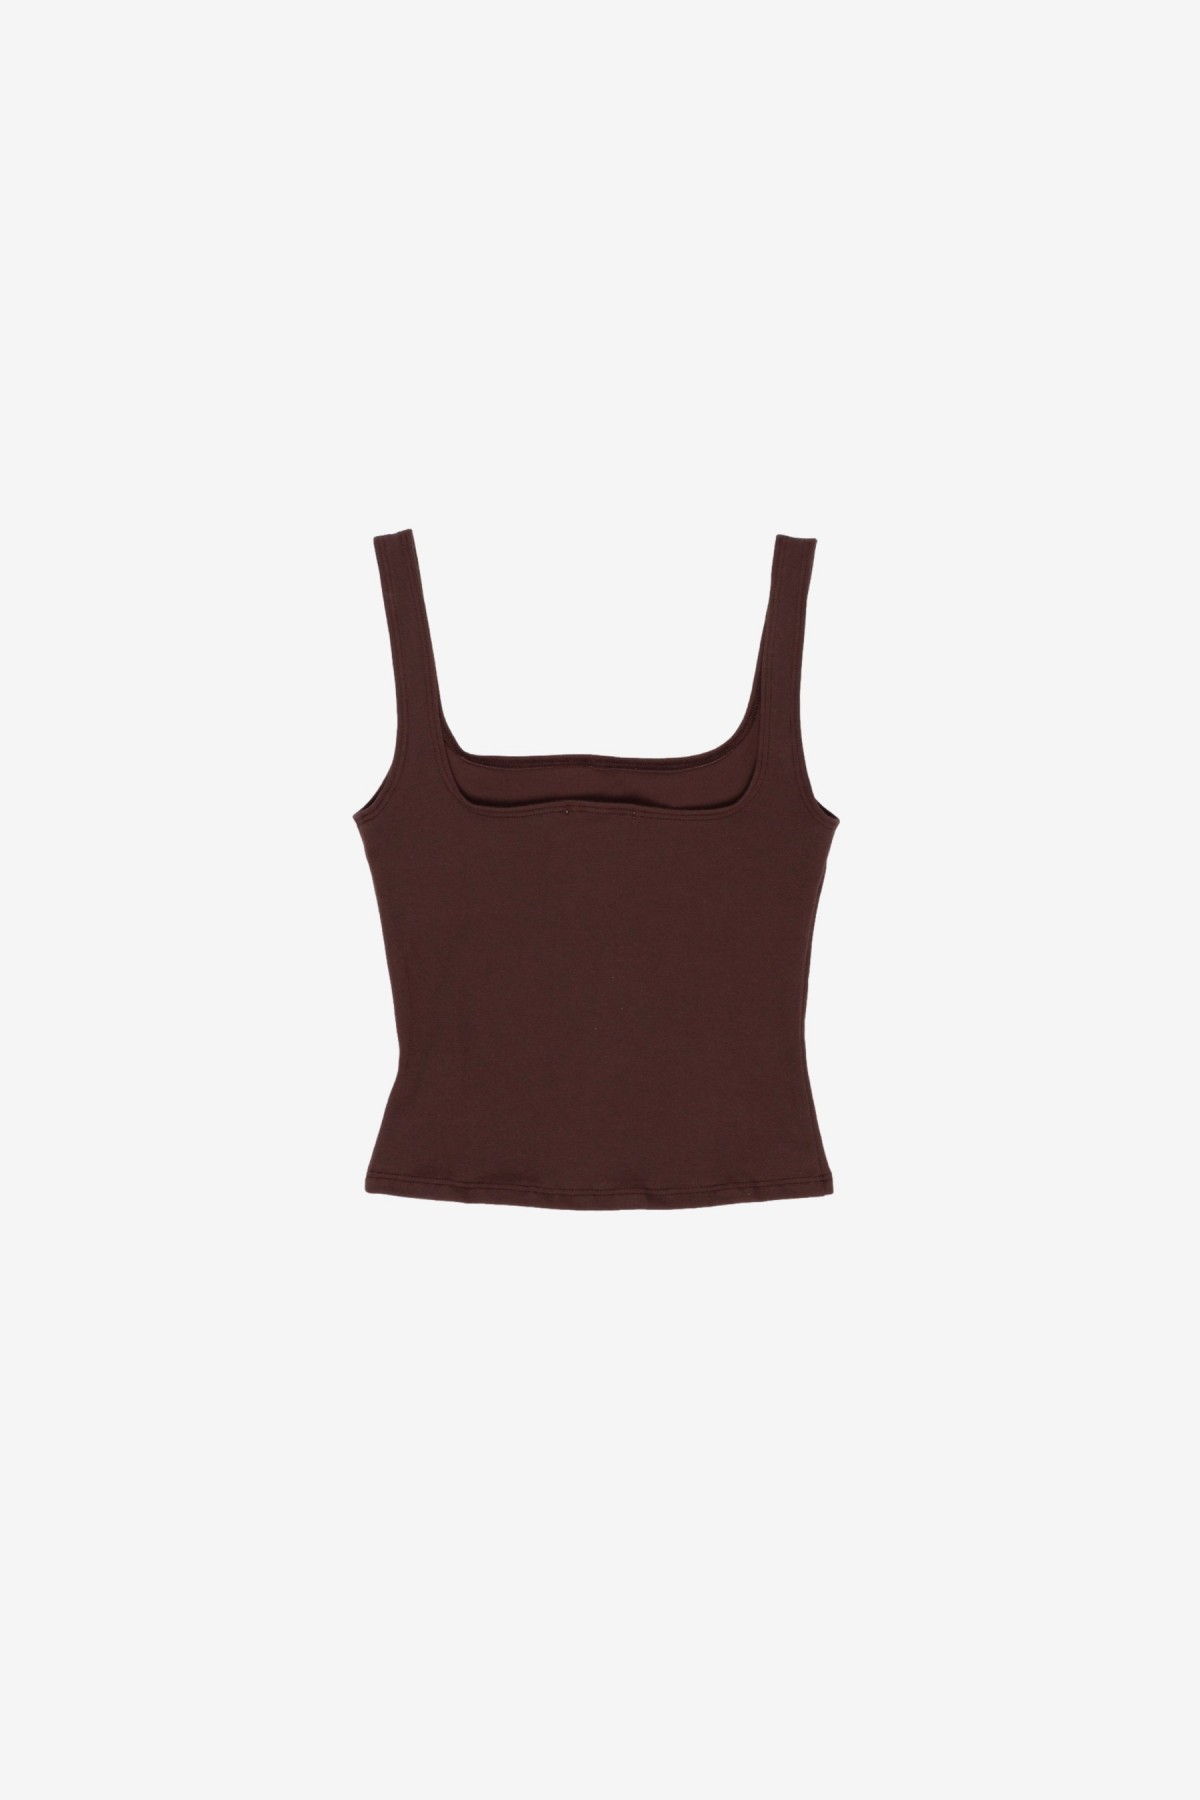 Gil Rodriguez Matisse Scooped Tank in Chocolate